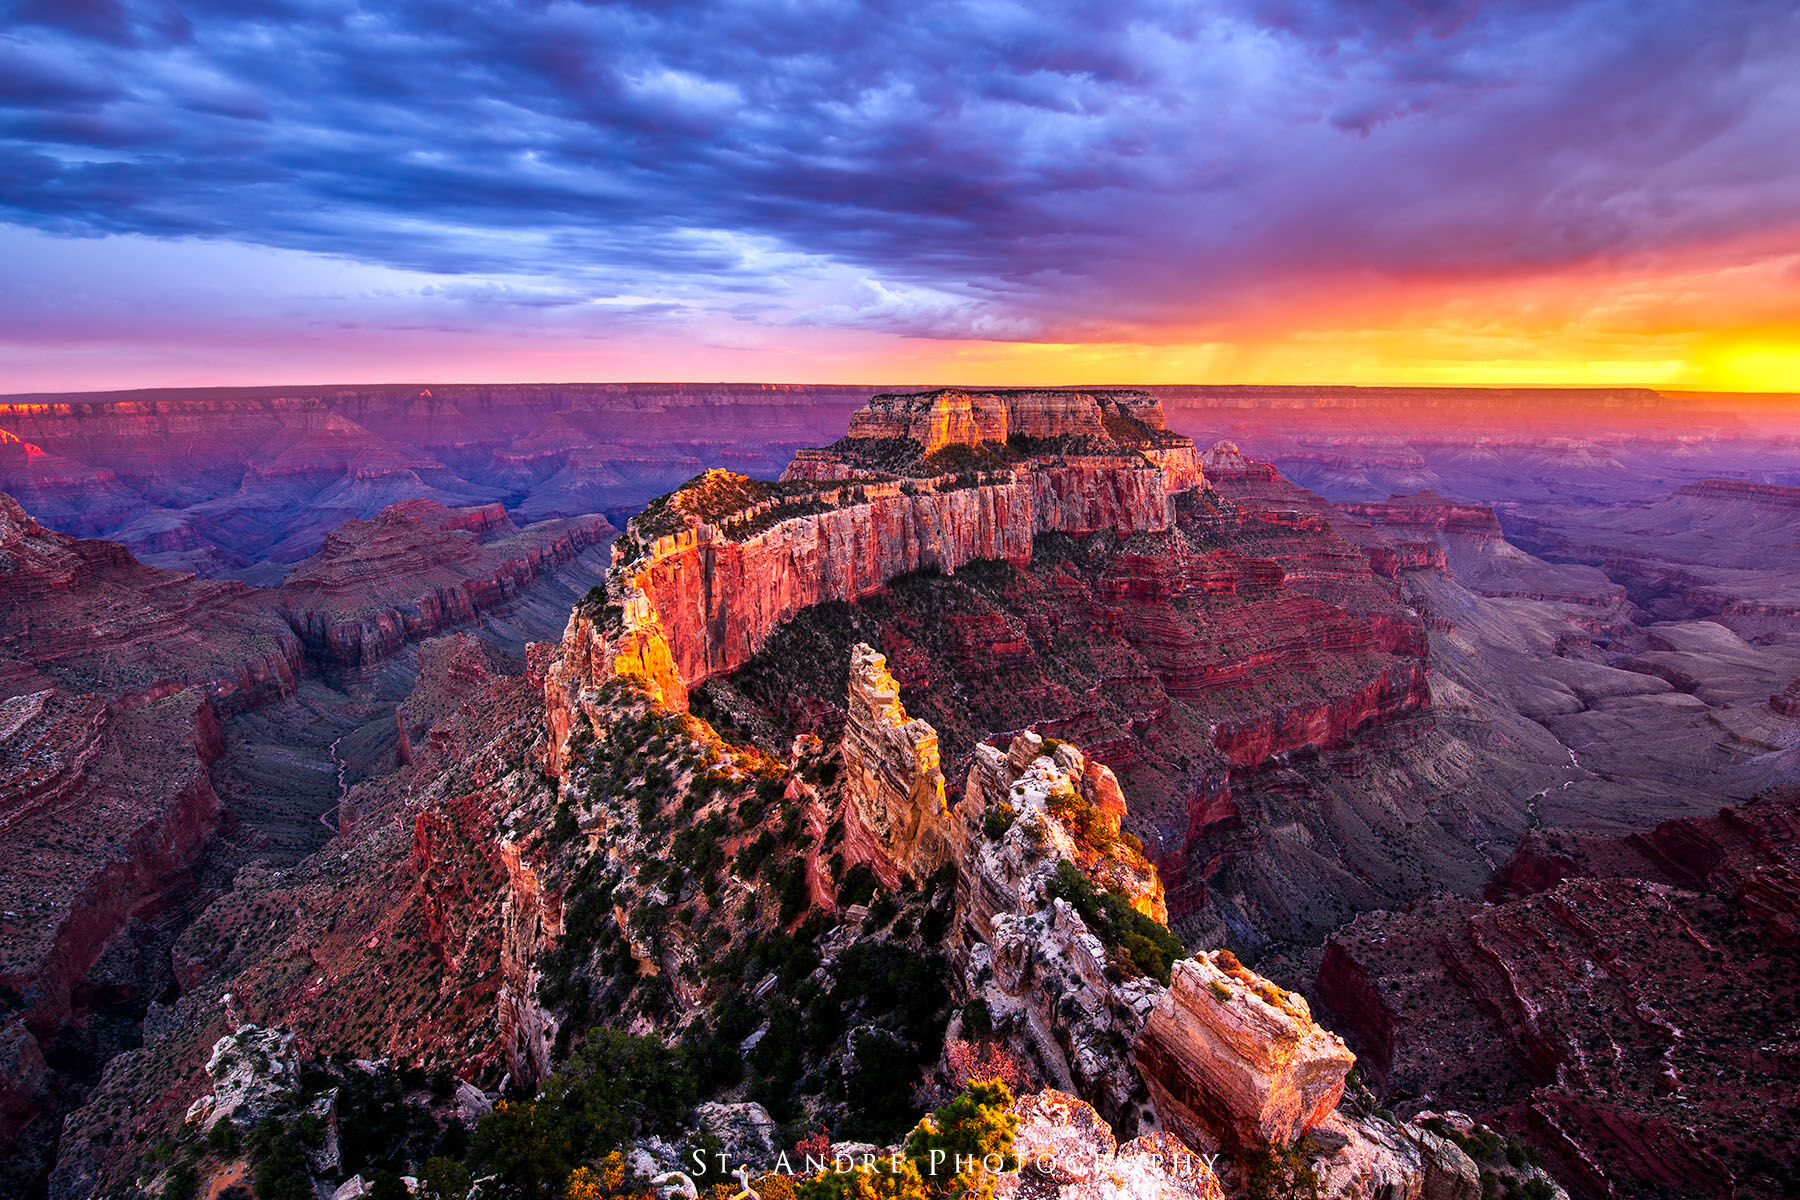 Cape Royal, Wotons Throne a large slender mesa juts into the grand canyon and is lit up by side light from a colorful sunset